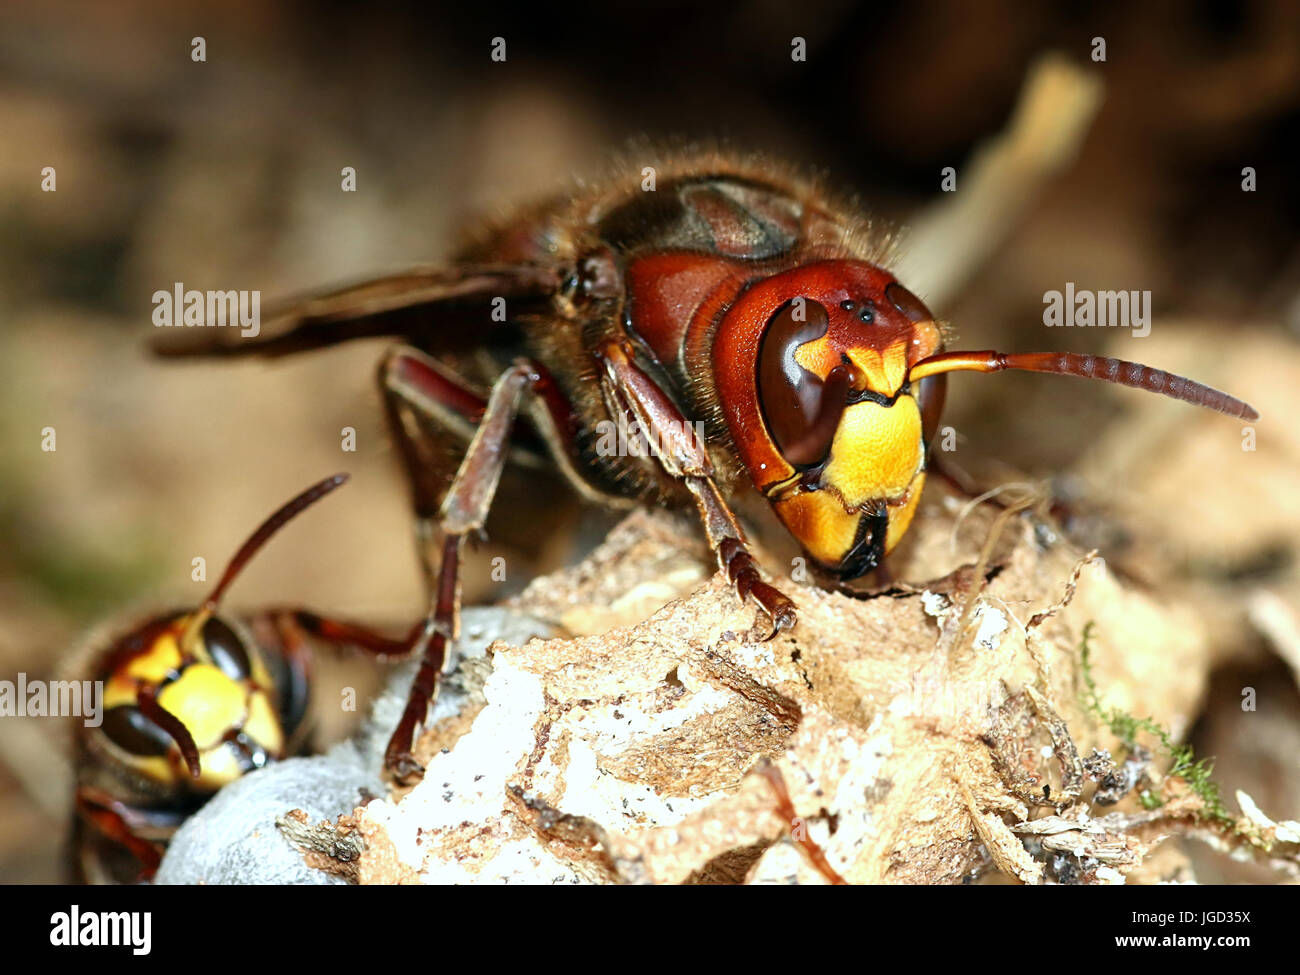 Extreme close up of the head and jaws of a Queen European hornet (Vespa crabro) busy constructing a nest. Stock Photo